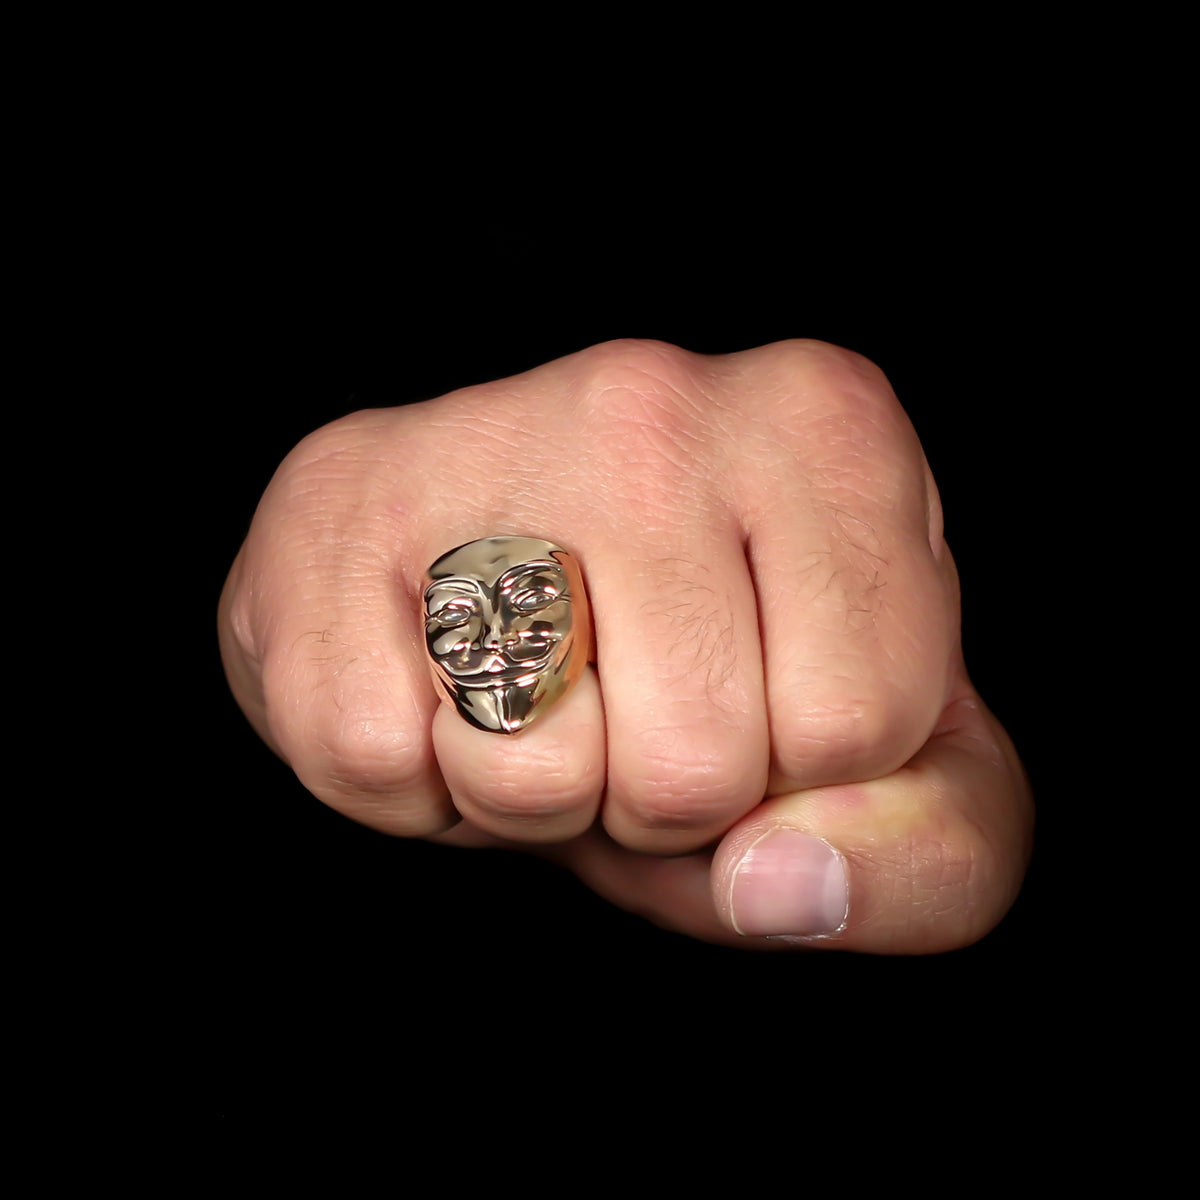 Vendetta Ring - Brass - Twisted Love NYC